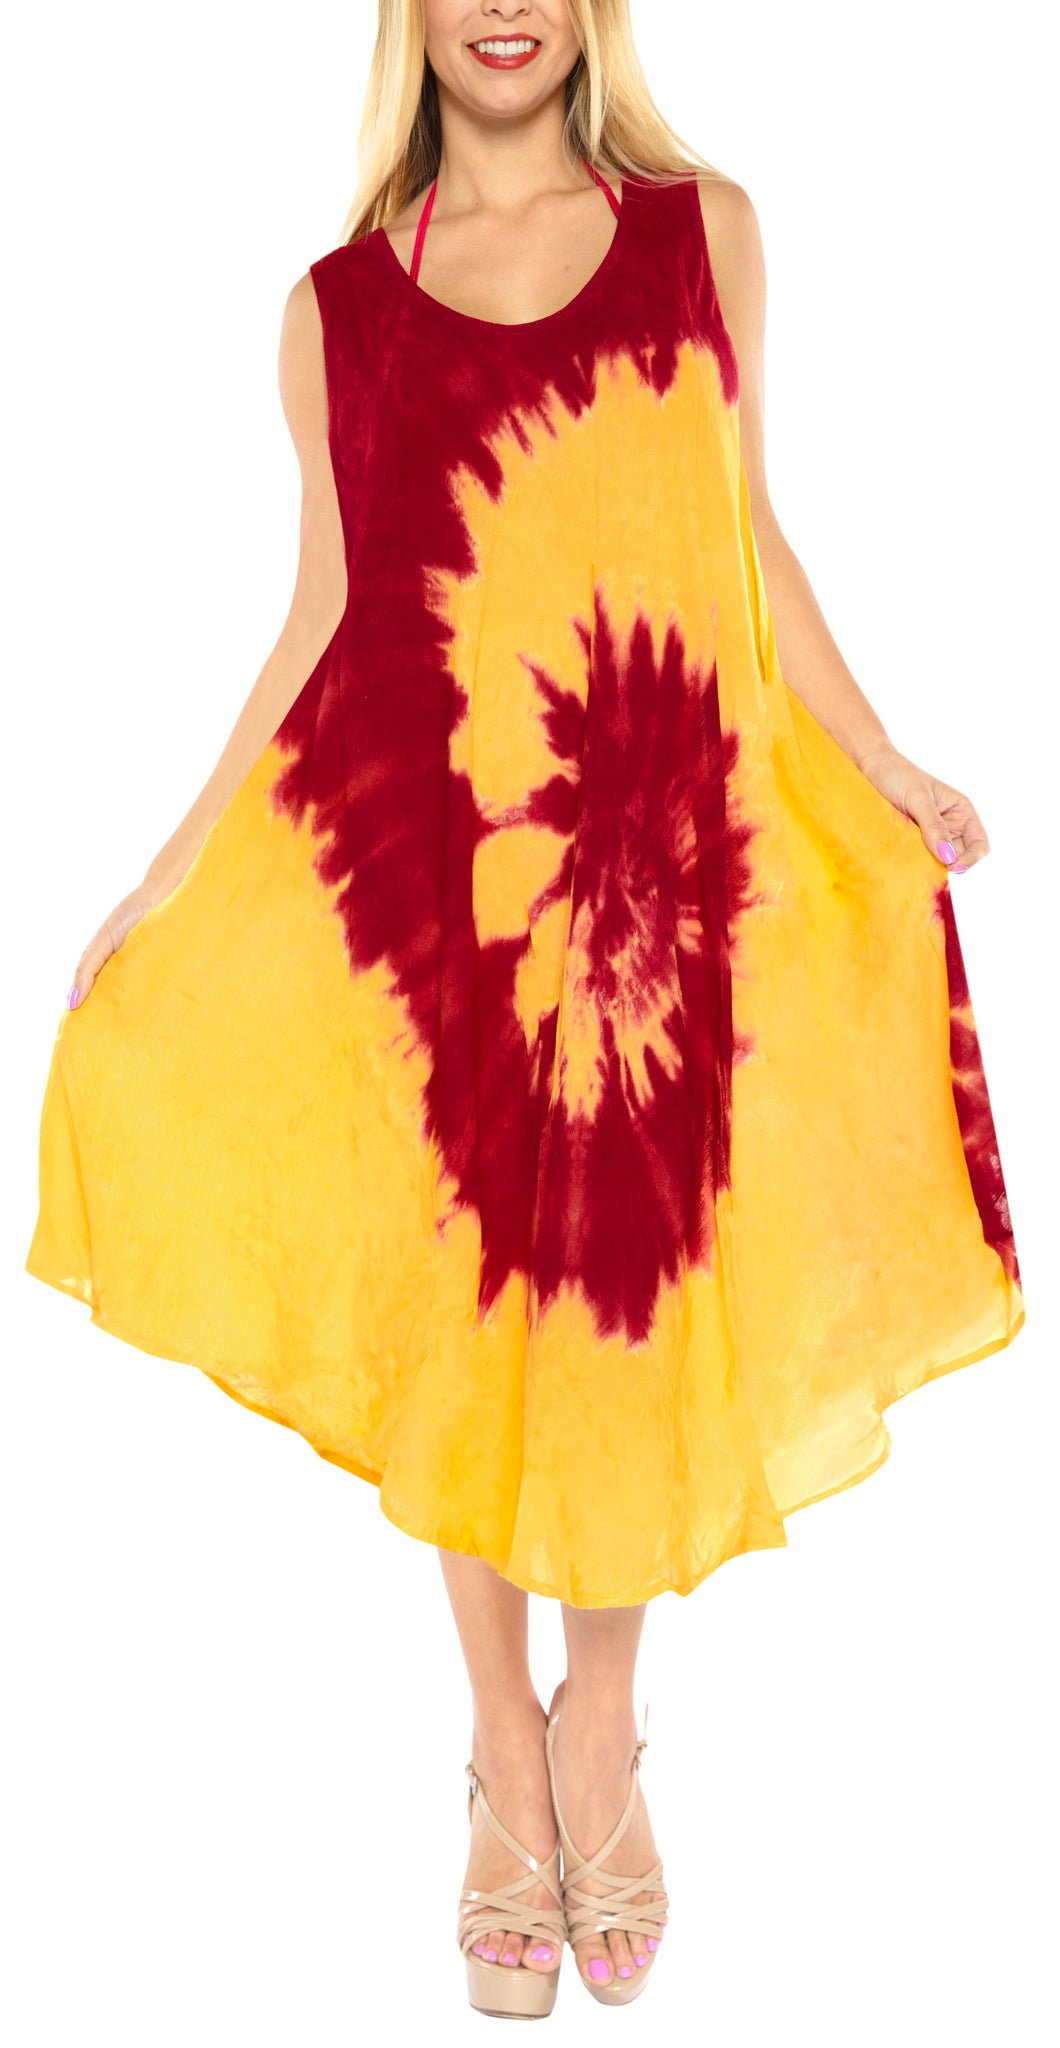 la-leela-casual-dress-beach-cover-up-rayon-tie-dye-swimwear-cover-up-top-caribbean-long-plus-size-red_i558